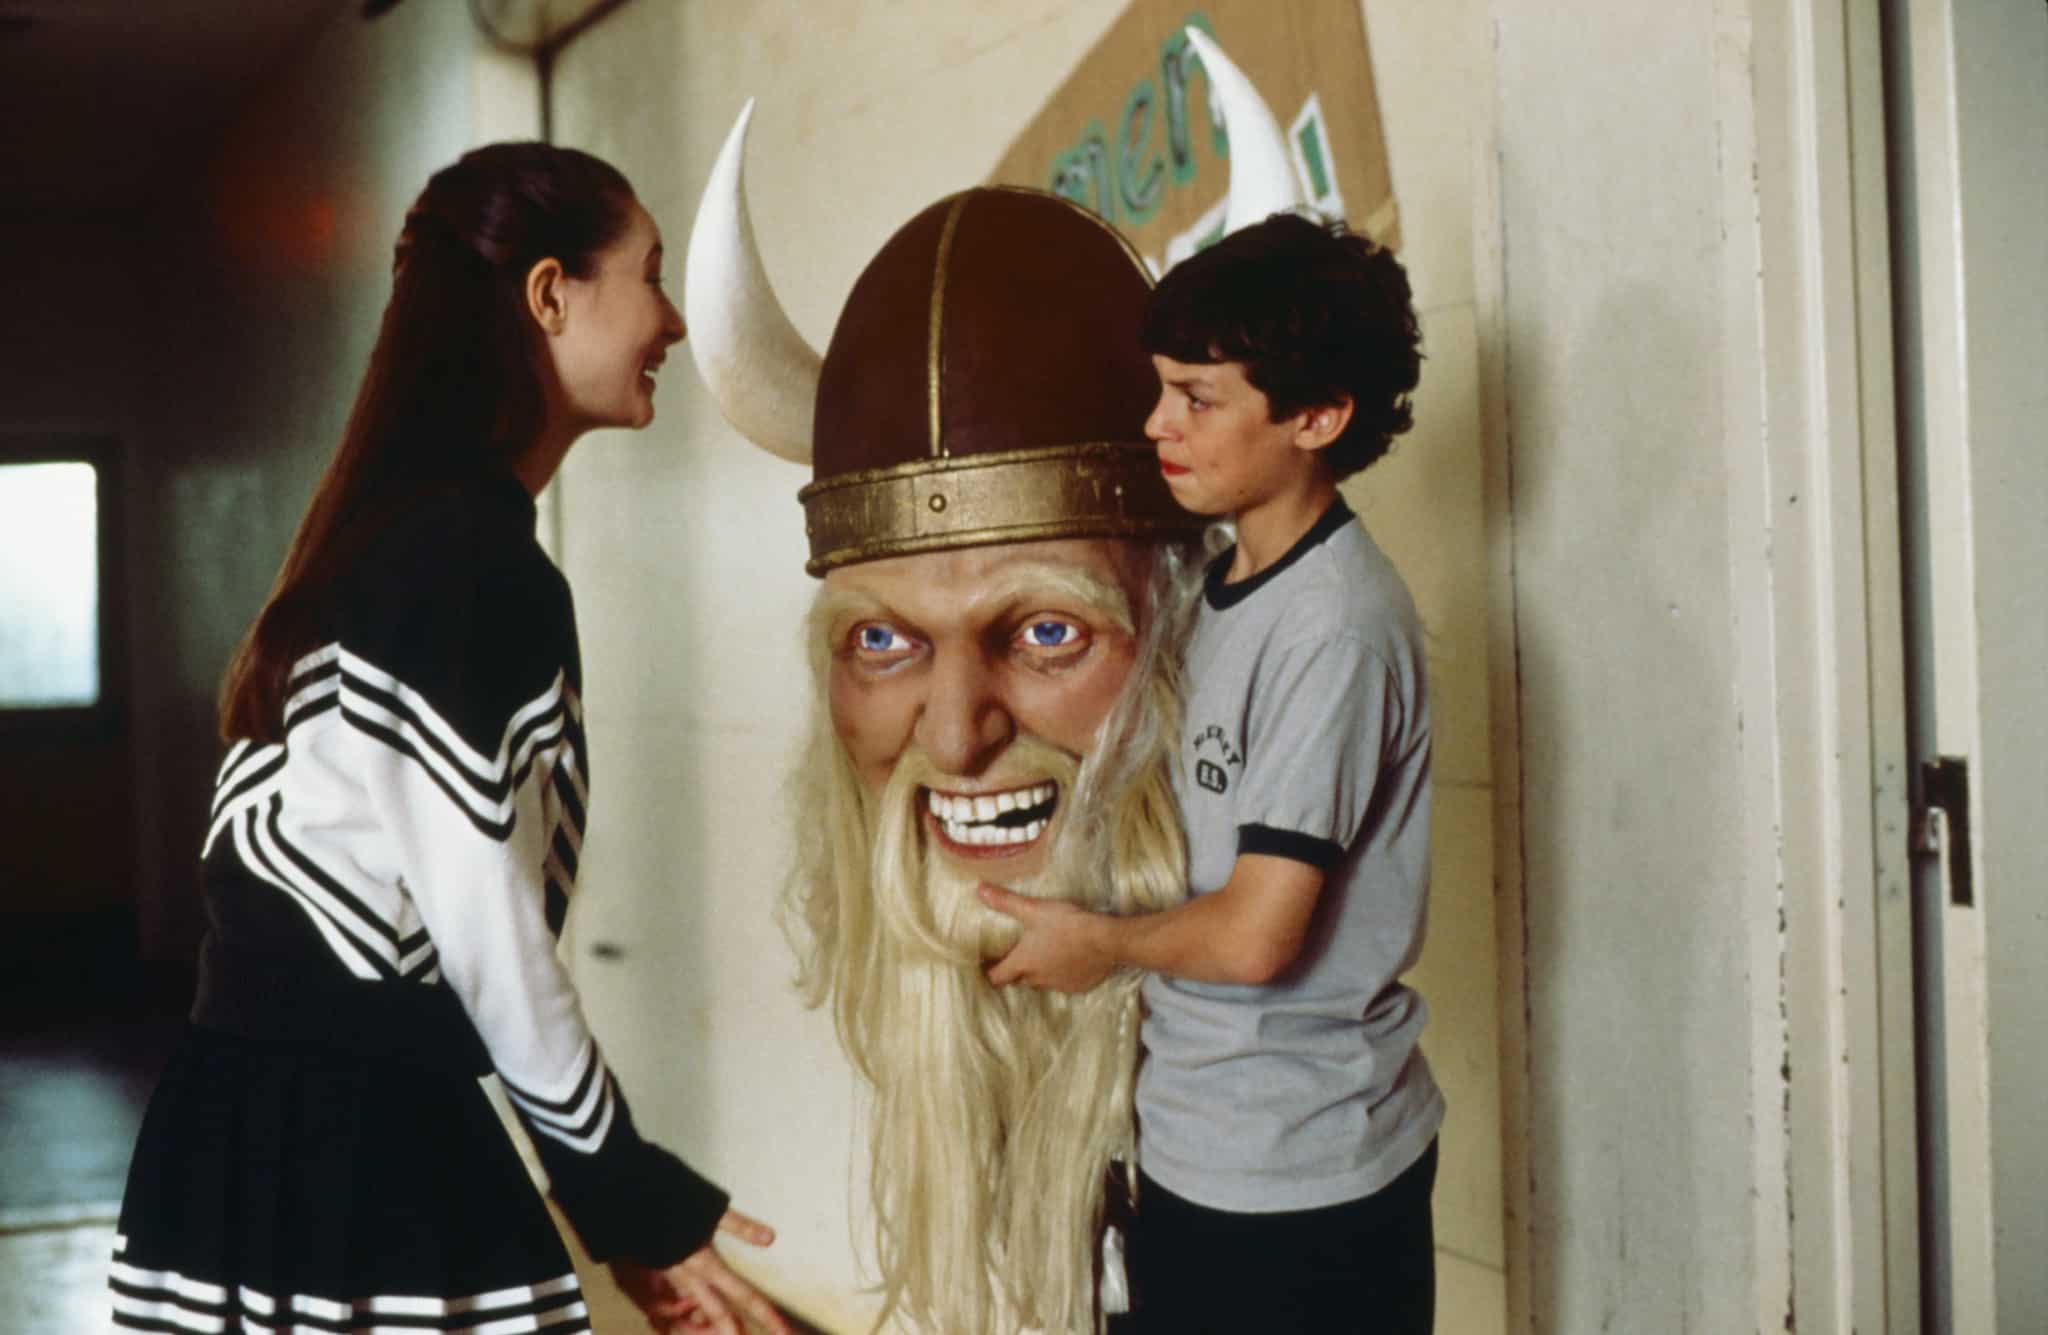 A young girl talks to a boy holding a mask in a school hallway in this image from DreamWorks Television.